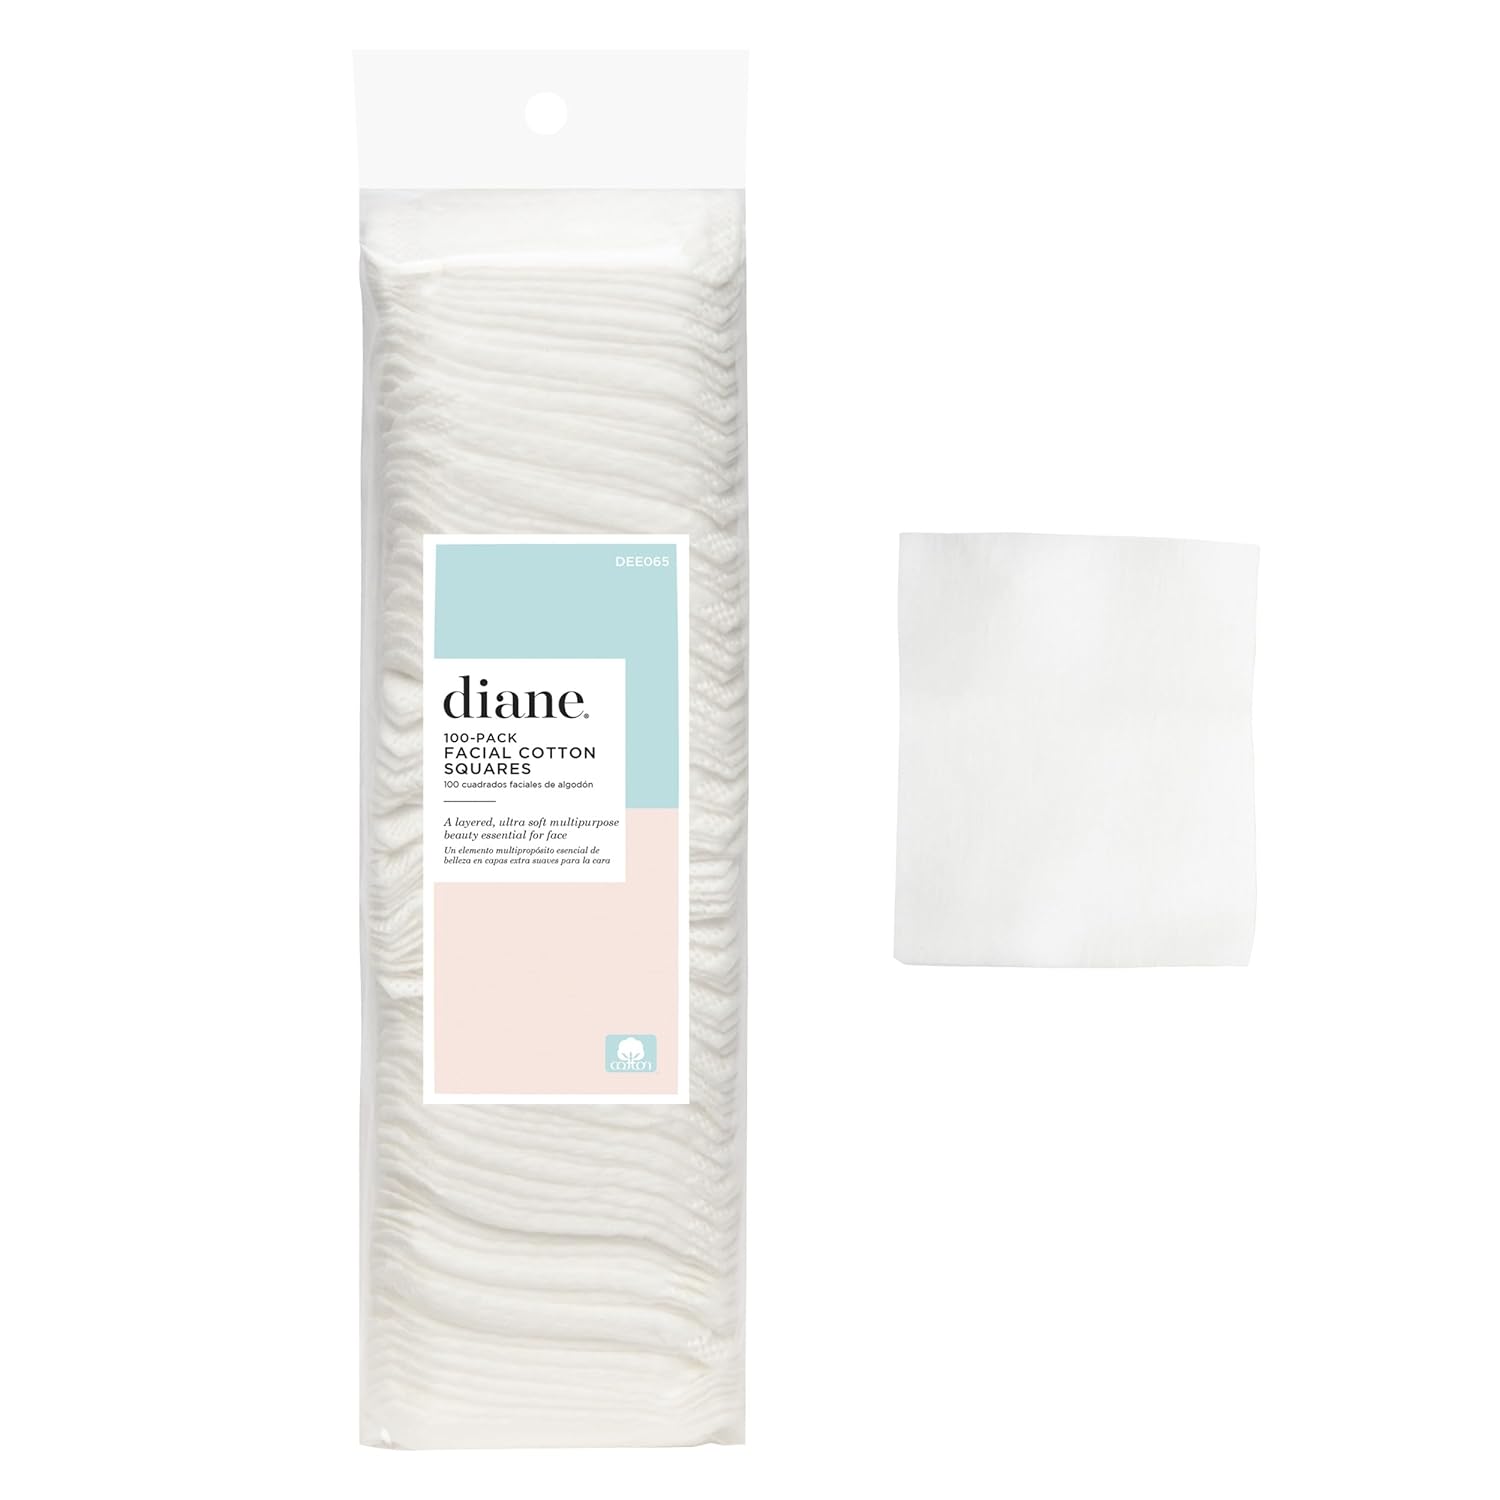 Diane Multi-Layer Cotton Facial Square Pads, 100 count, 100% Pure Cotton, Hypoallergenic, Biodegradable, Strong and Durable Makeup and Nail Polish Removal Wipes